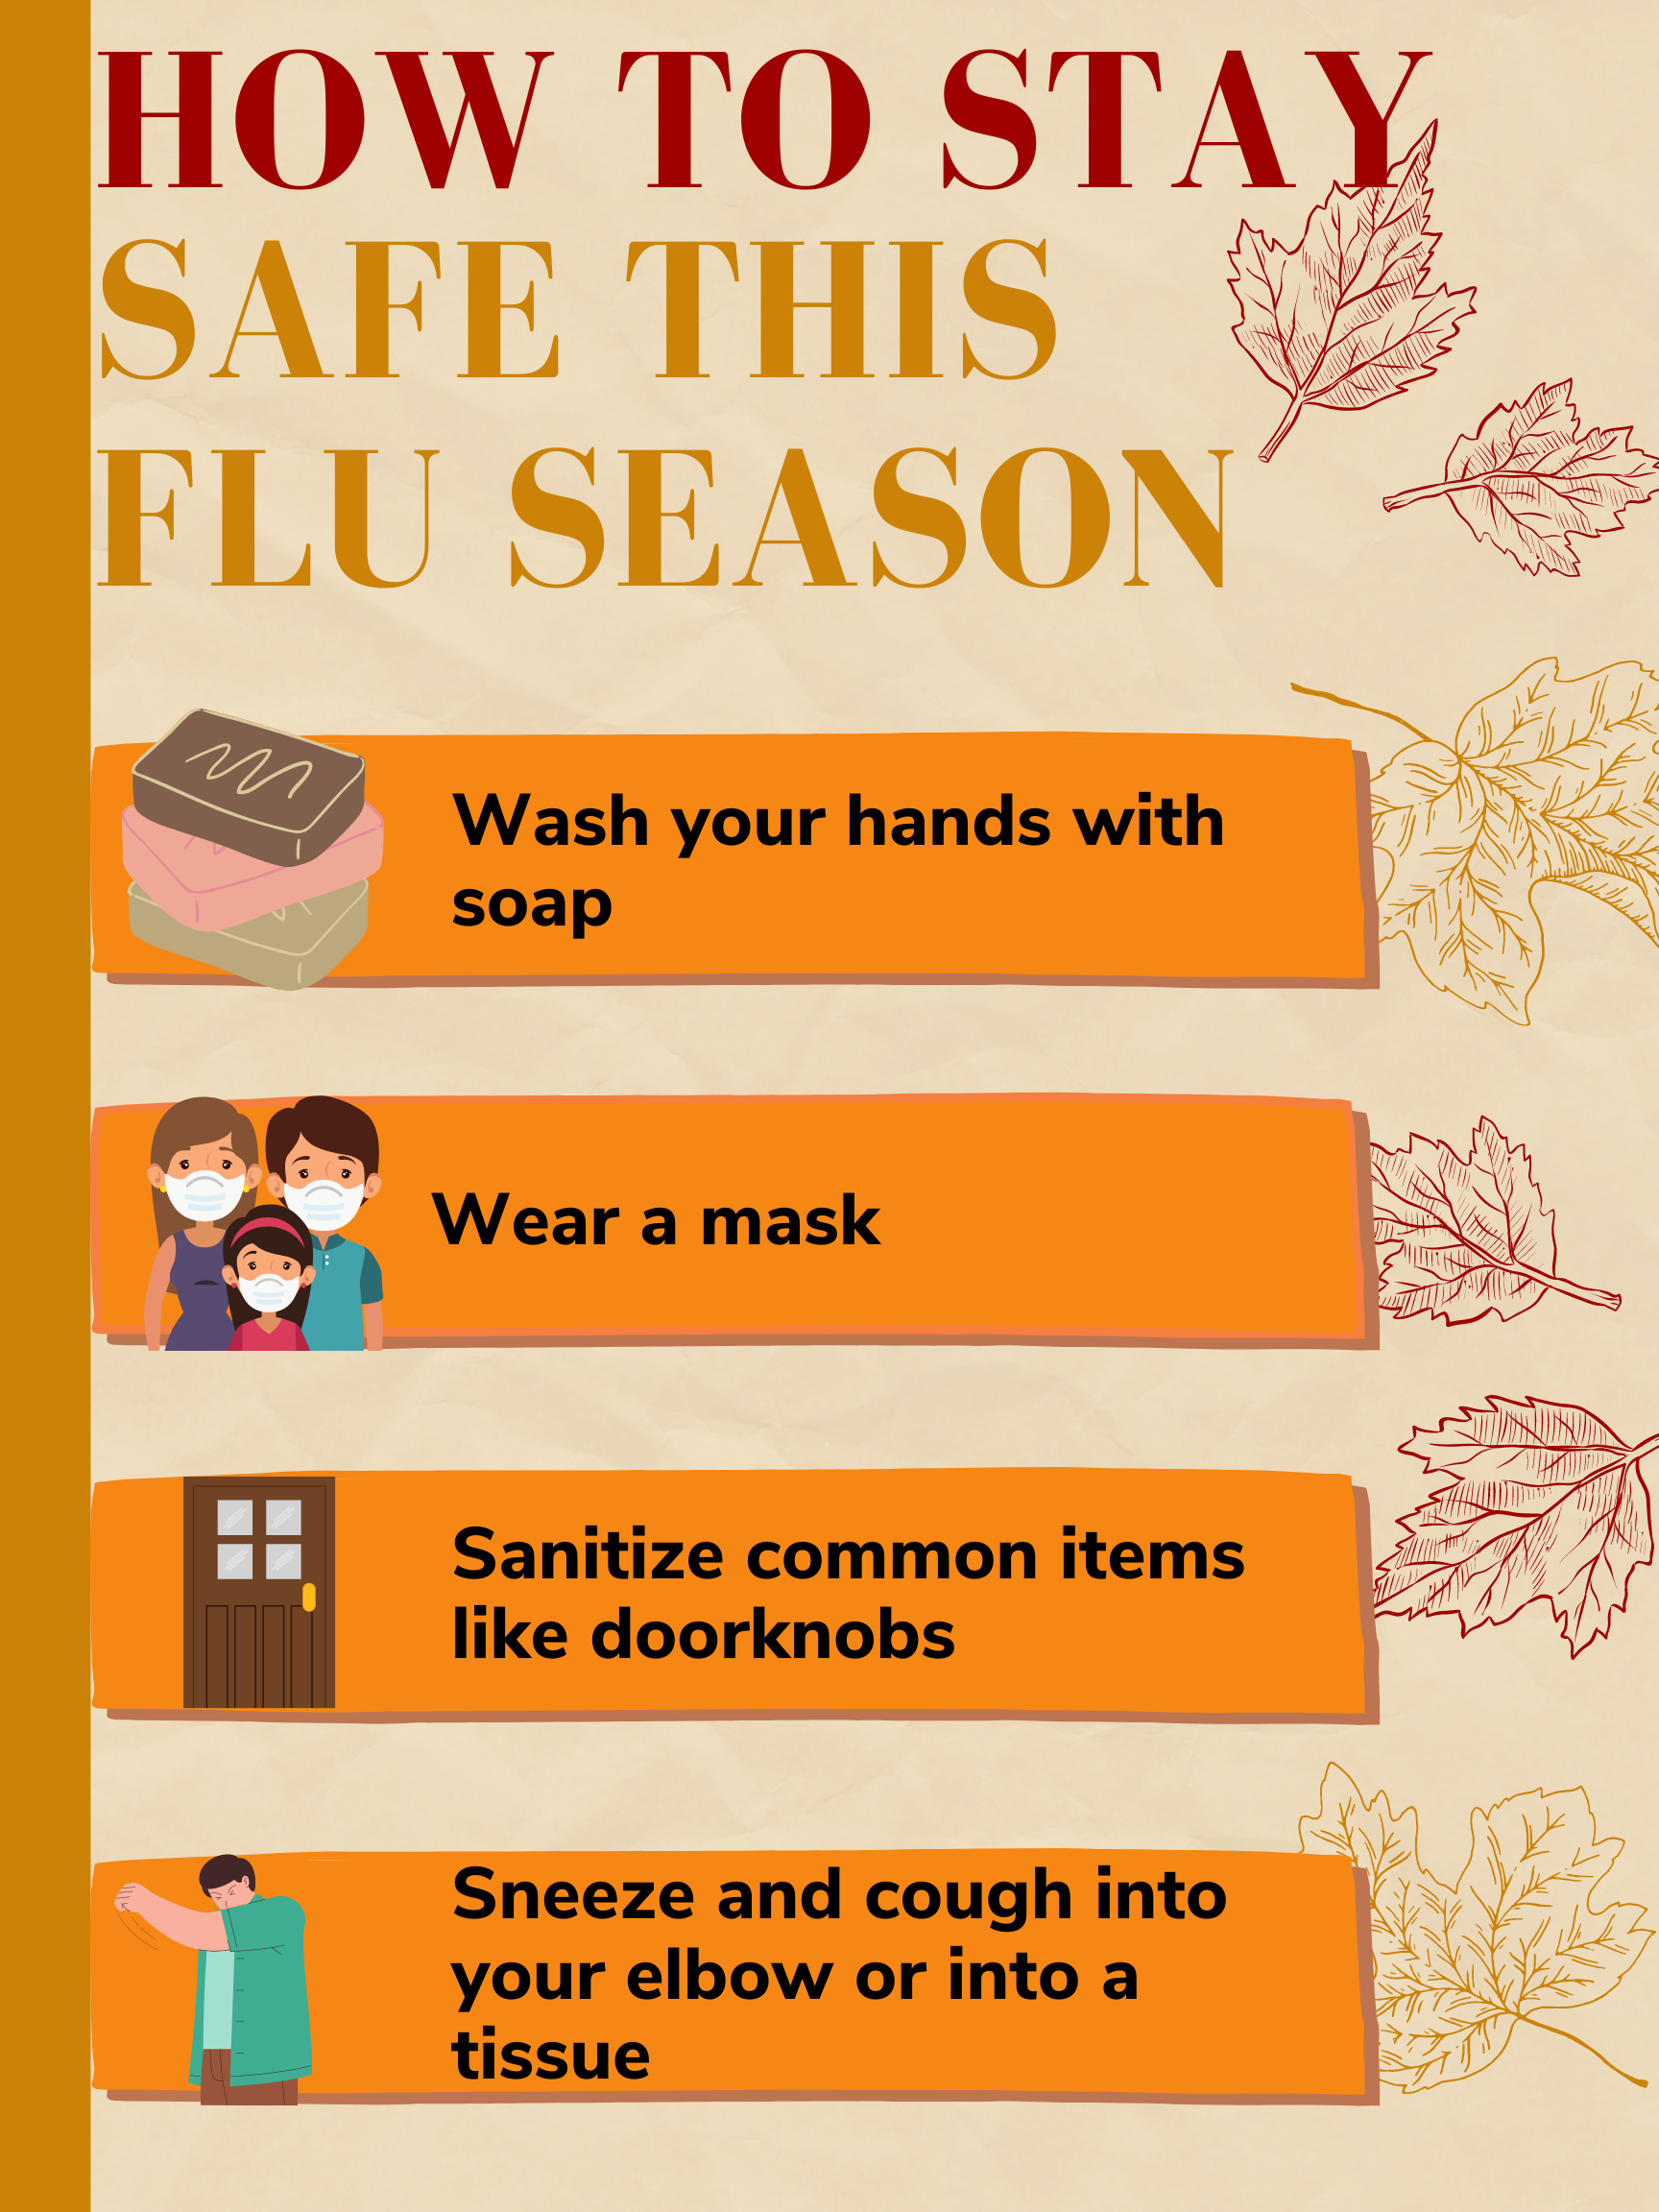 Common practices that can help you be safe this flu season - Halolife Review, Coupon